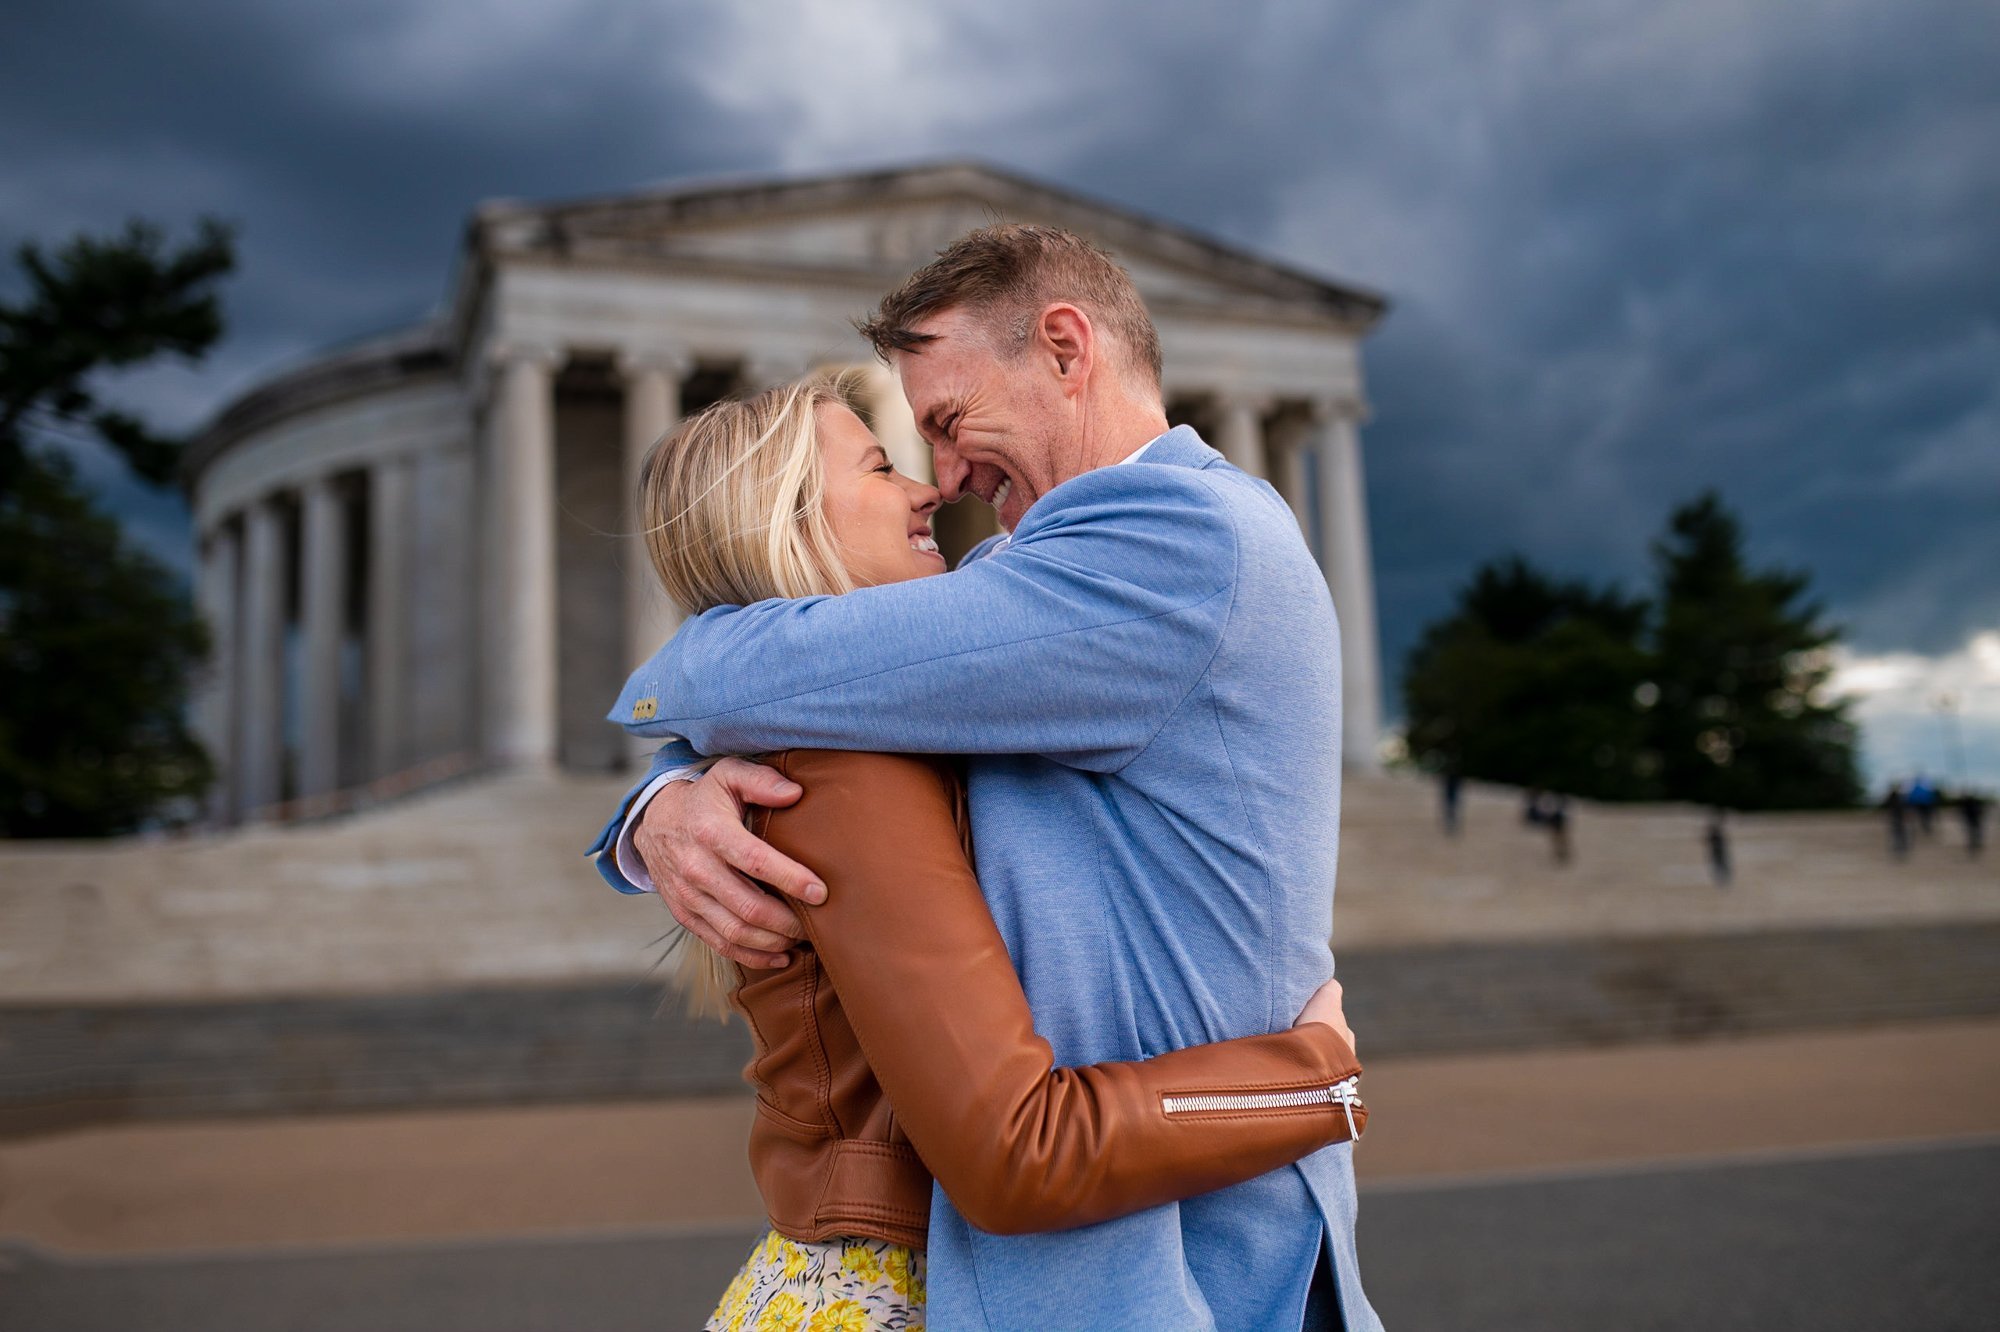 &lt;p&gt;A photo of a couple in a romantic embrace in front of the Jefferson Memorial in Washington D.C. The couple is standing on the marble steps leading up to the monument, which is illuminated by the warm light of the setting sun. The lush greene